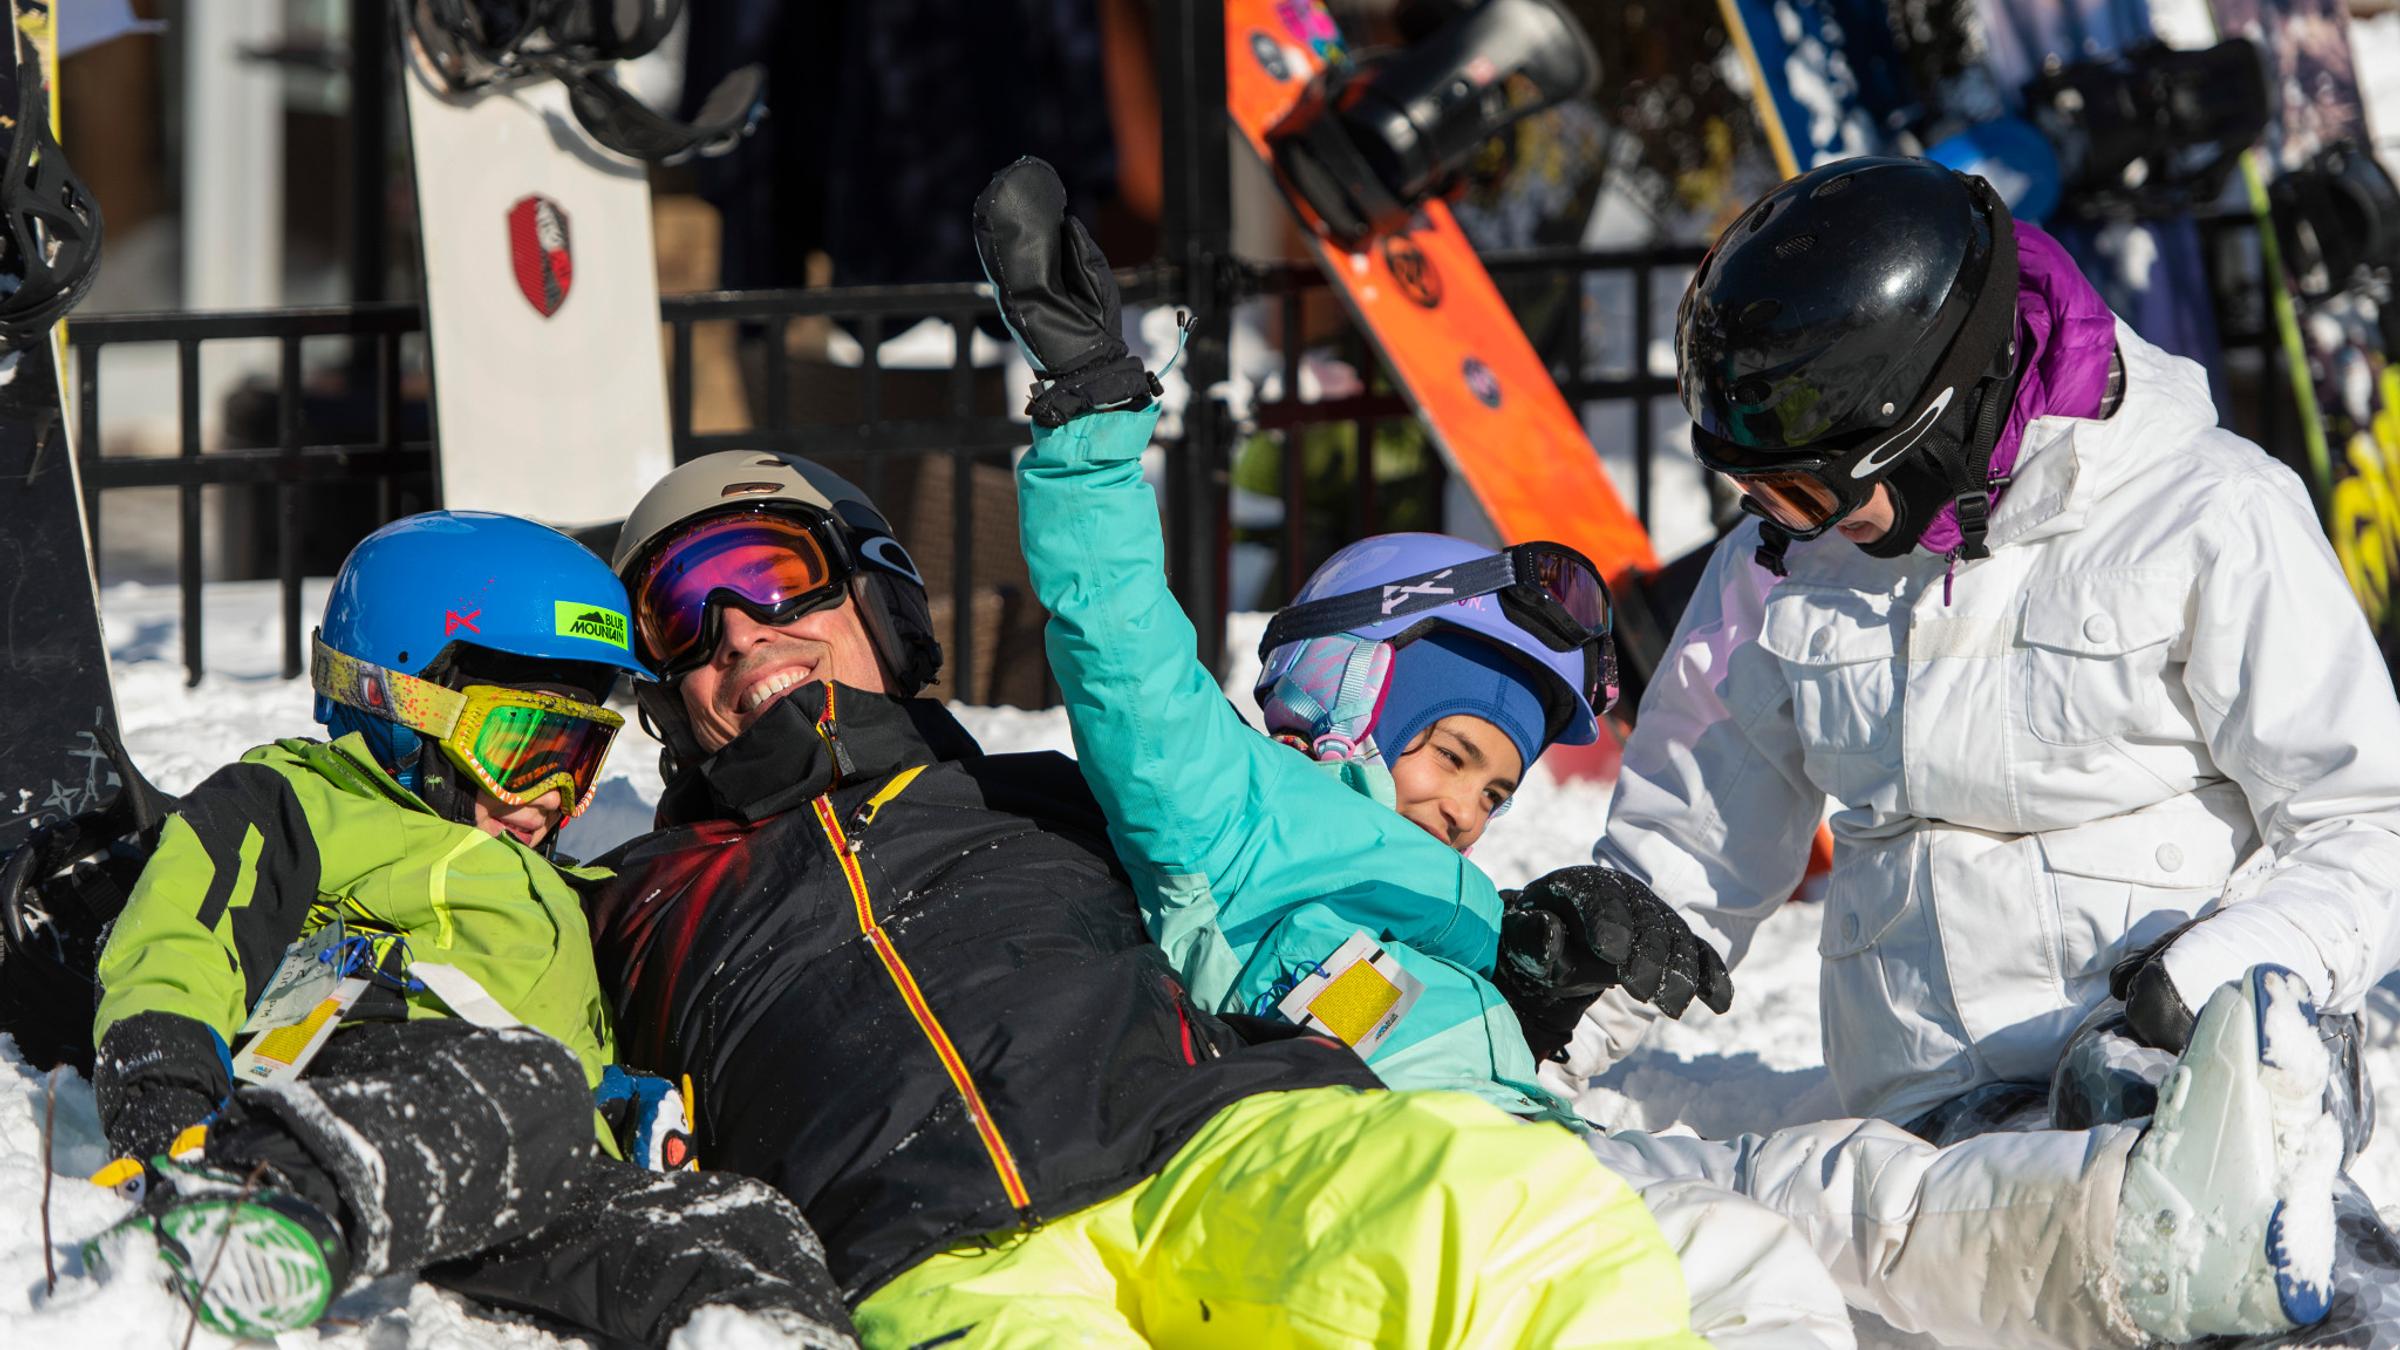 Winter lifestyle - individuals, couples and families interacting in ski and snowboard gear